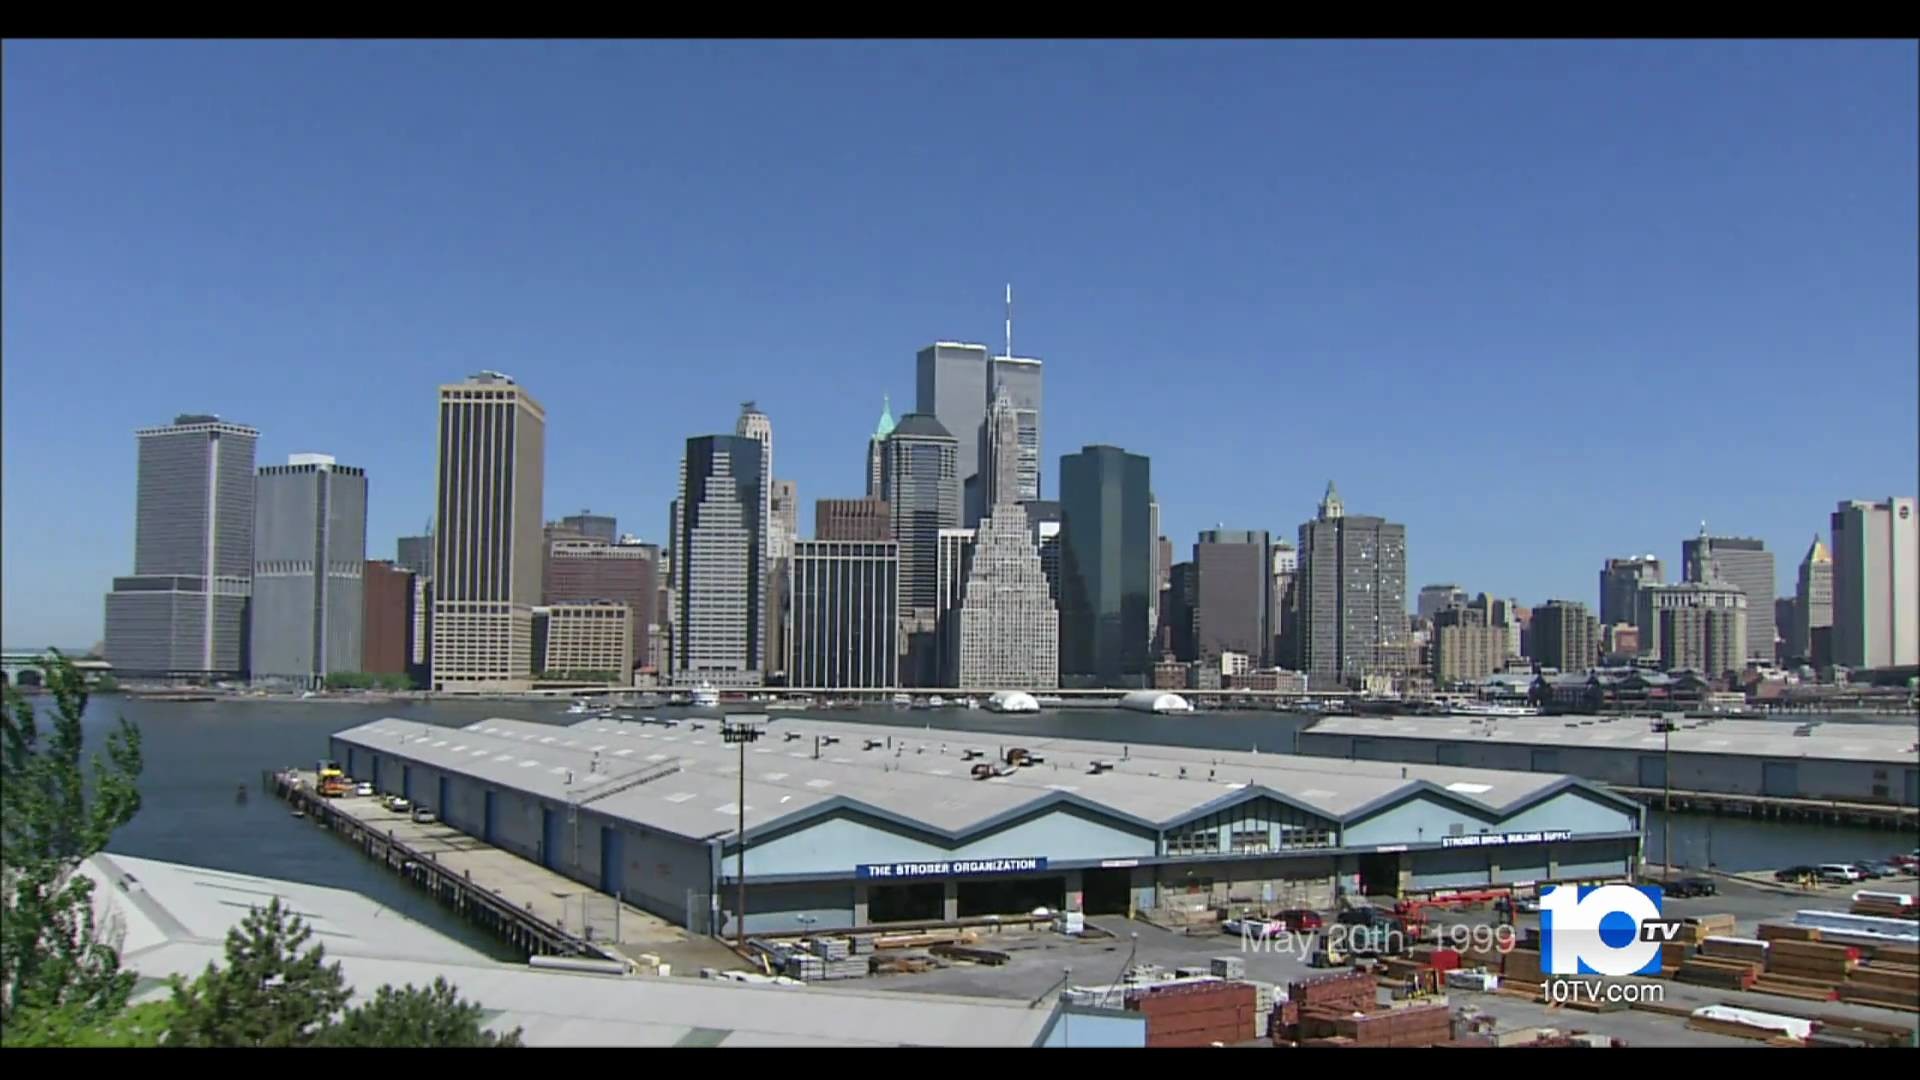 1920x1080 A High Definition Look at New York City in 1999 - World Trade Center -  Times Square - 1080p HD